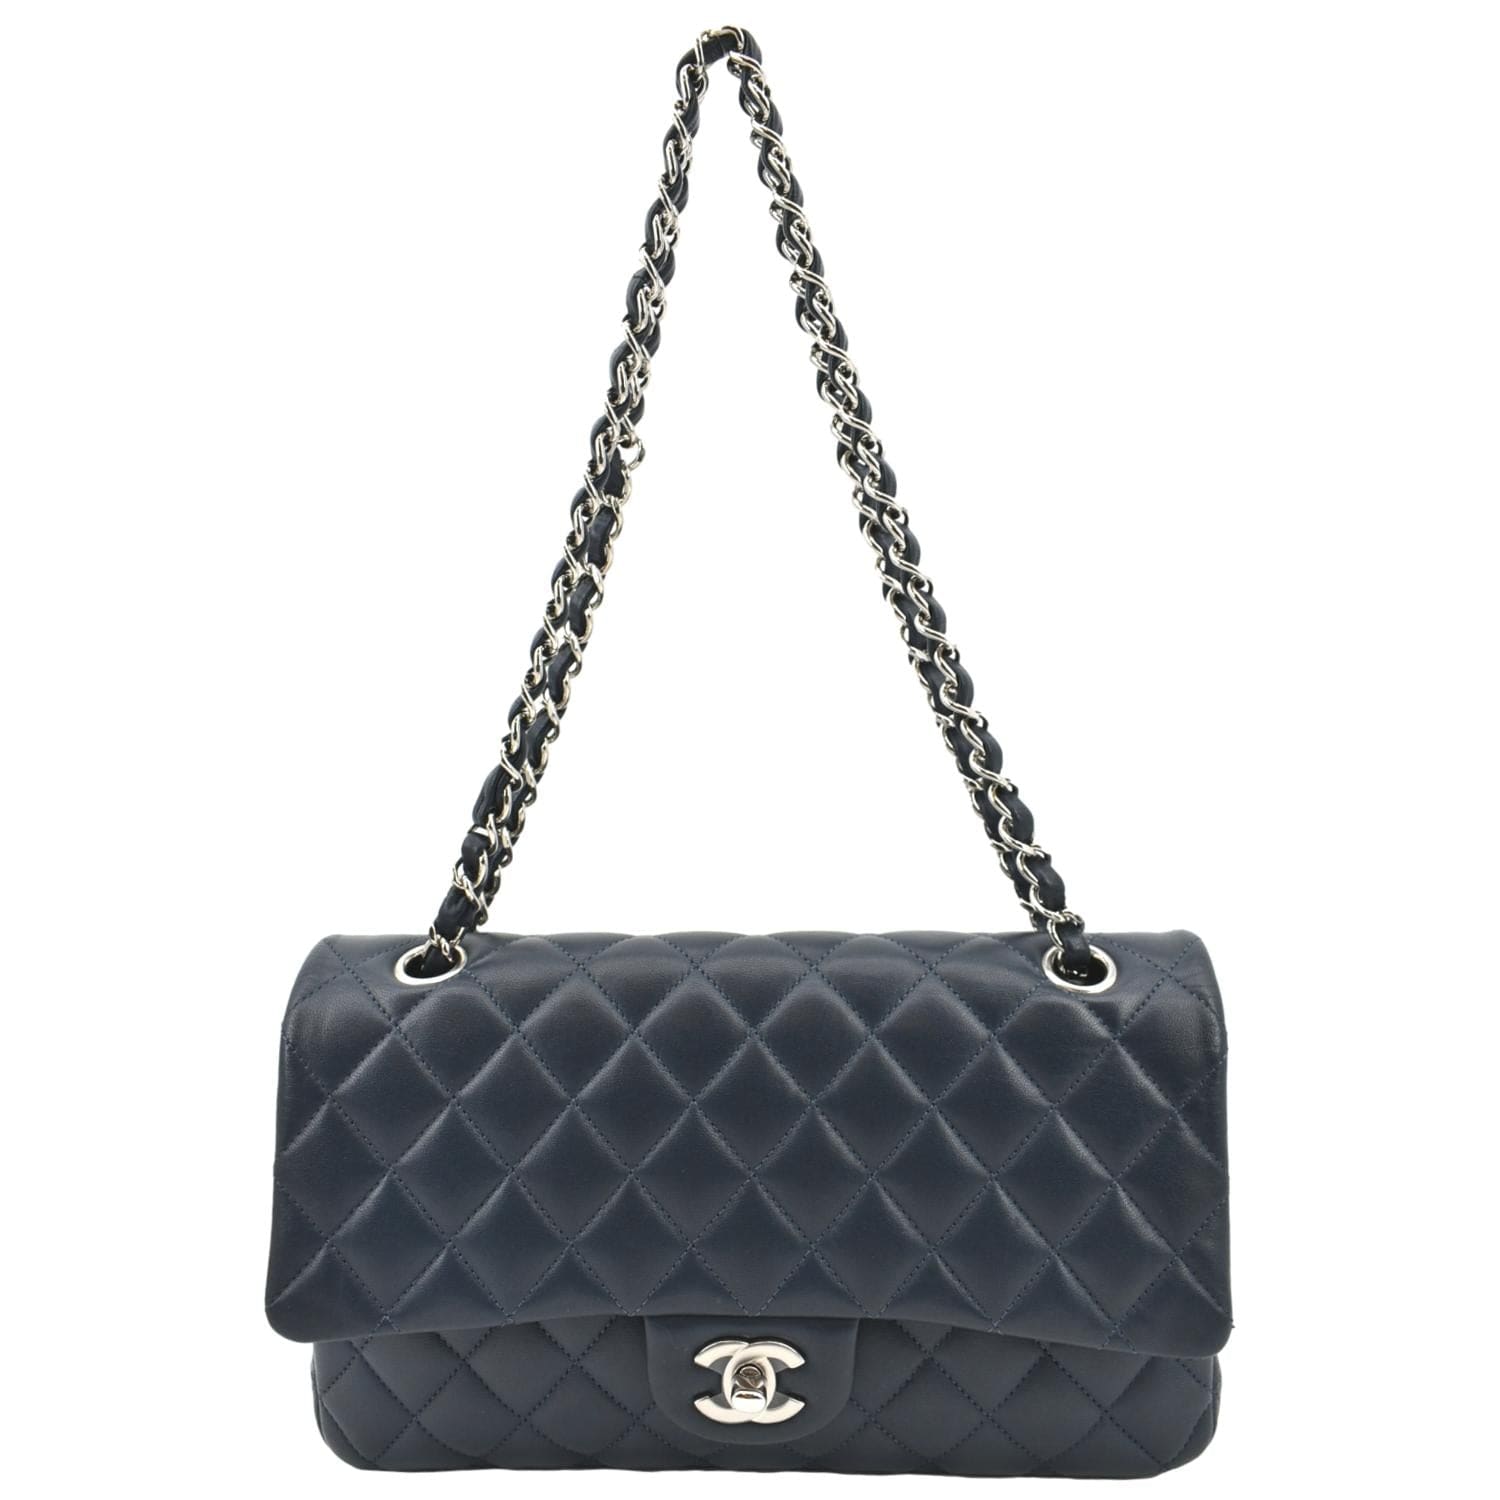 Snag the Latest CHANEL CHANEL Classic Flap Extra Large Bags